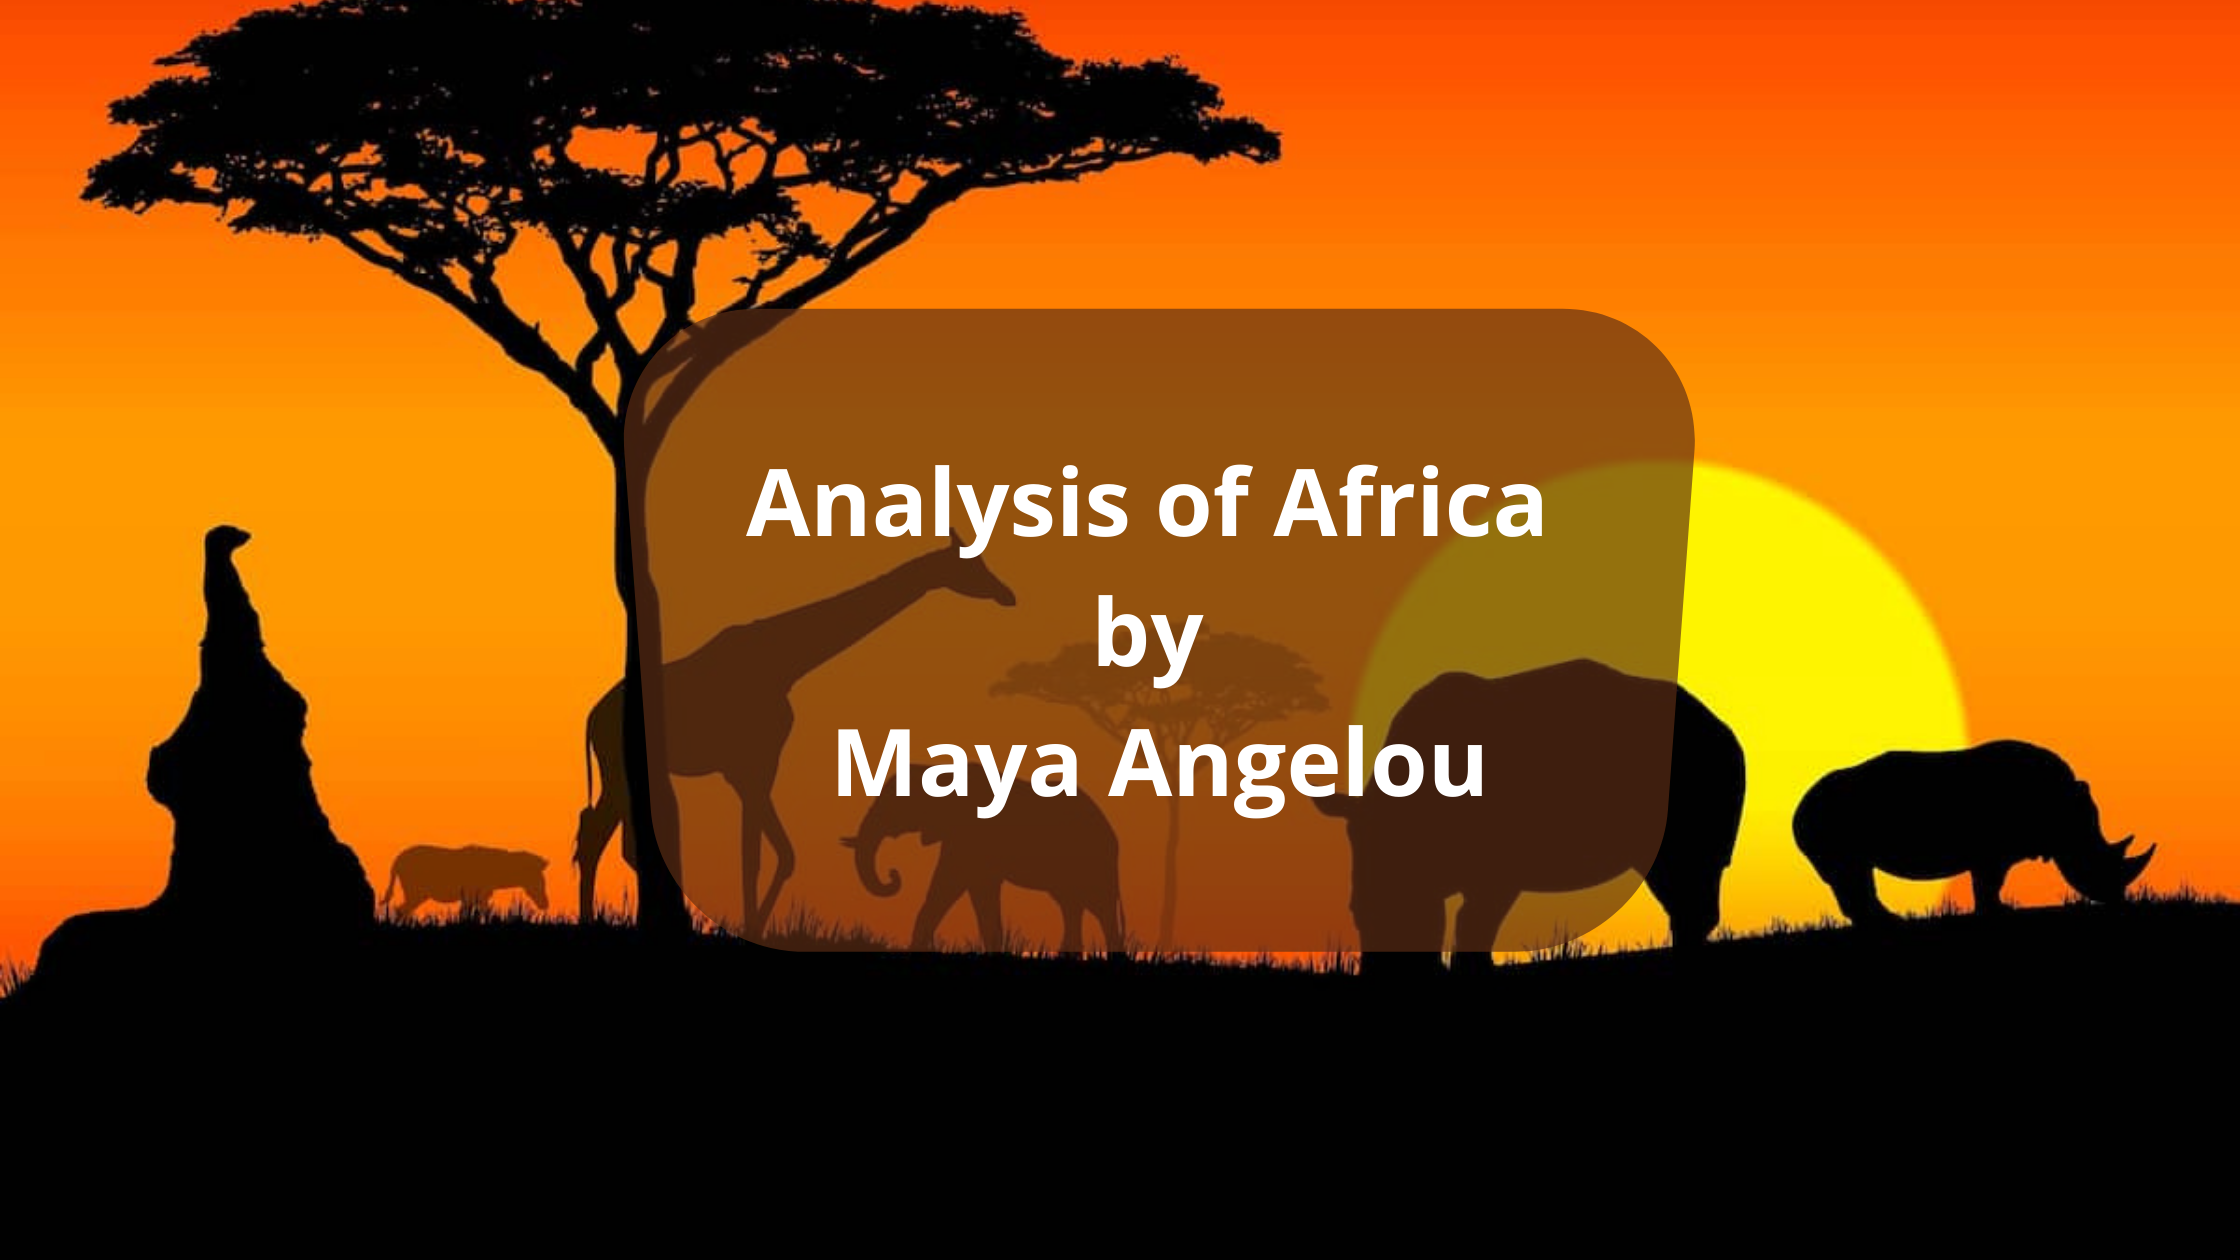 Analysis of Africa by Maya Angelou